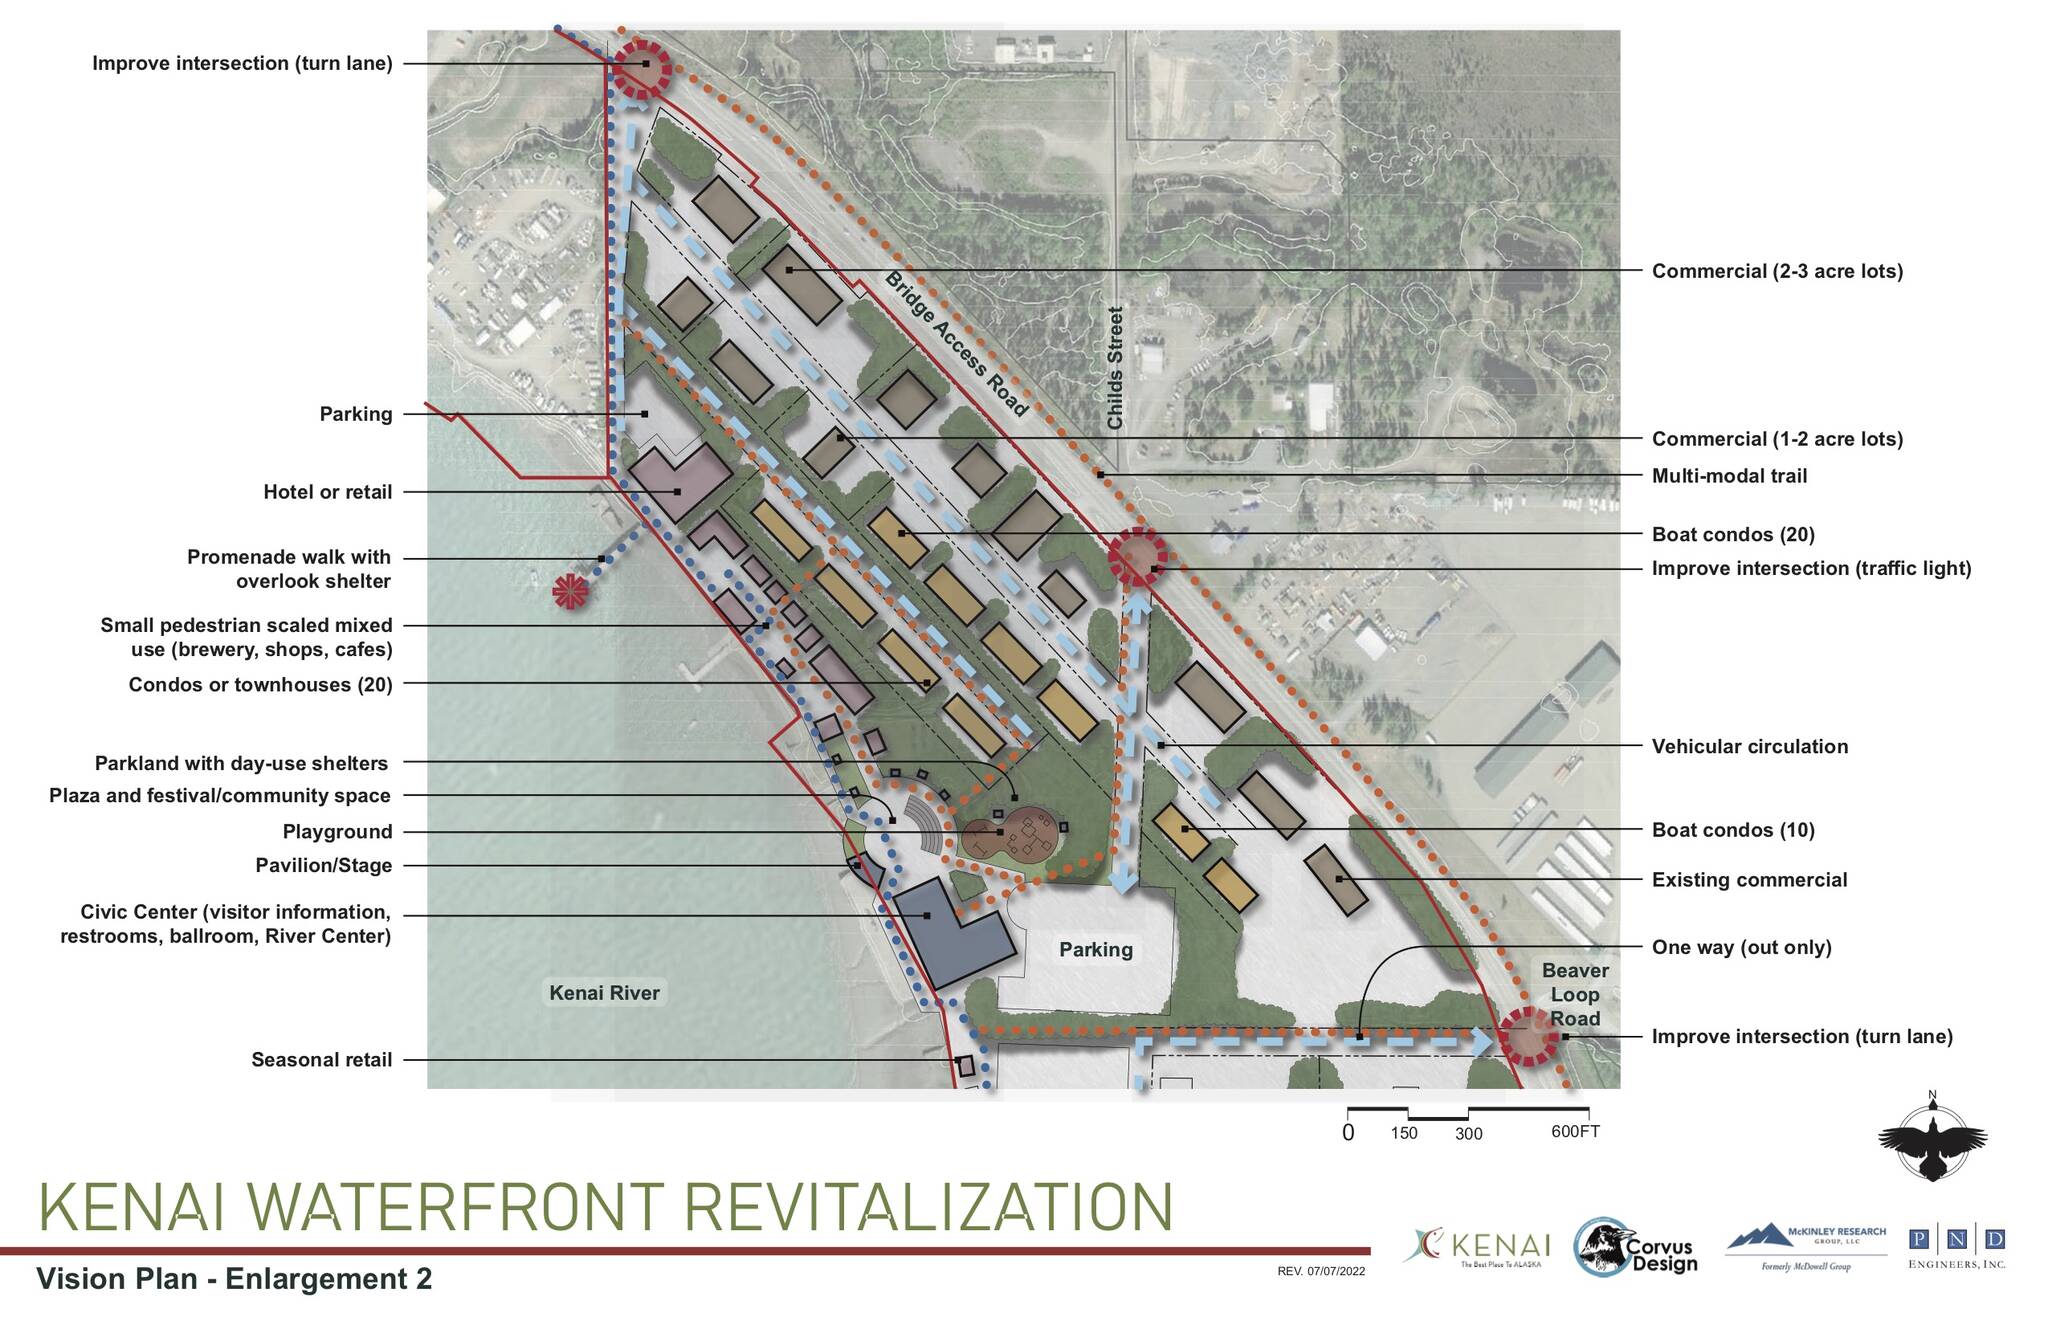 A vision plan prepared by McKinley Research Group shows potential uses of waterfront space identified as a priority for revitalization. (Plan via City of Kenai)